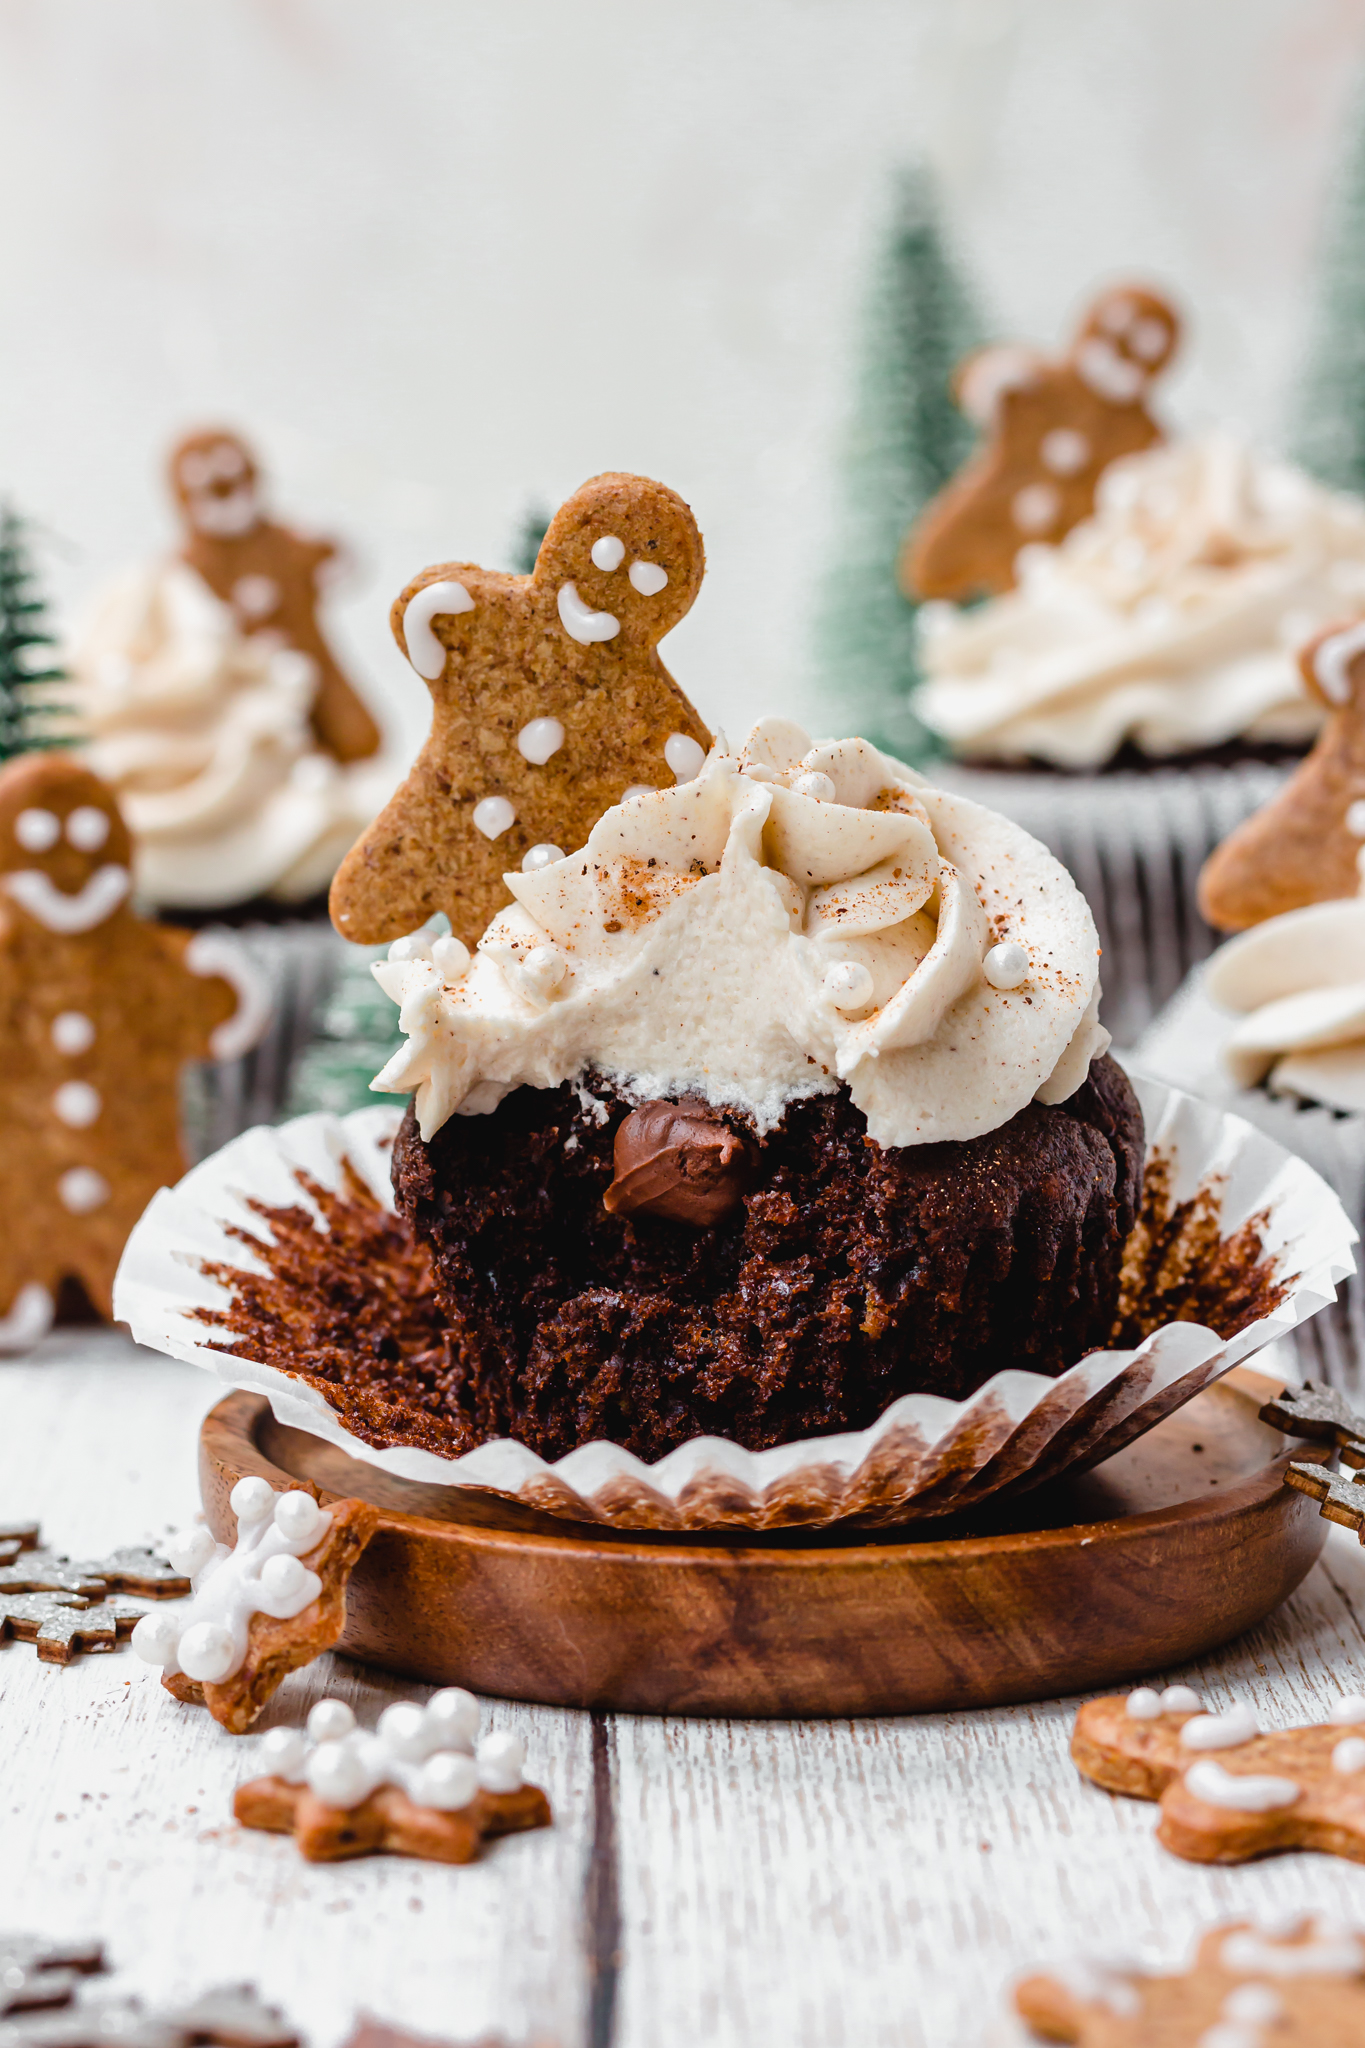 One Chocolate Gingerbread Cupcake on a wooden plate